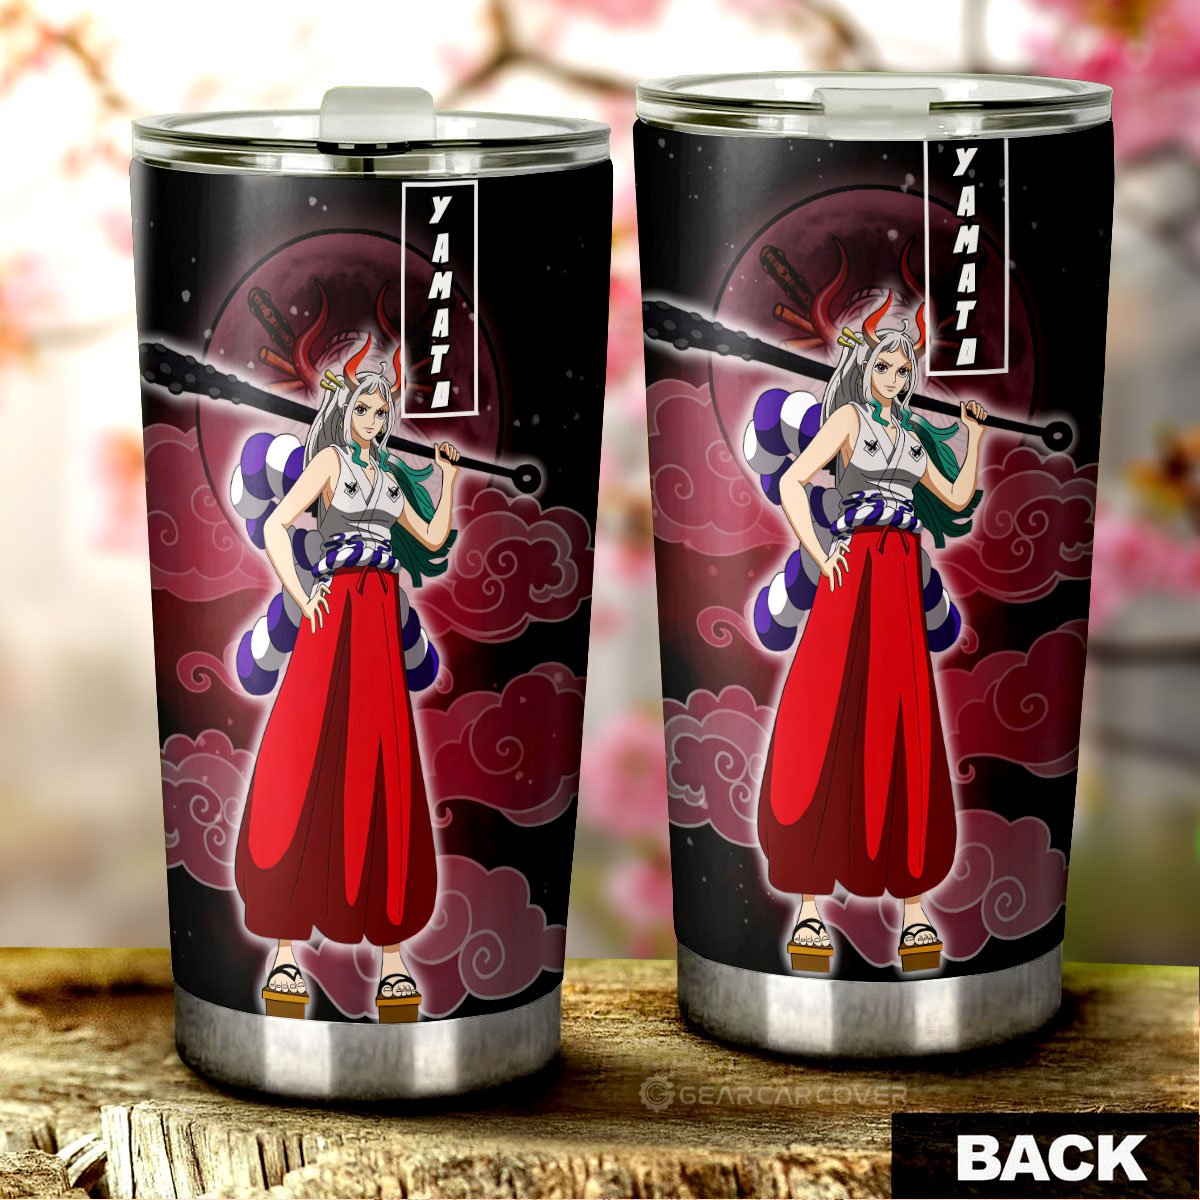 Yamato Tumbler Cup Custom For One Piece Anime Fans - Gearcarcover - 3